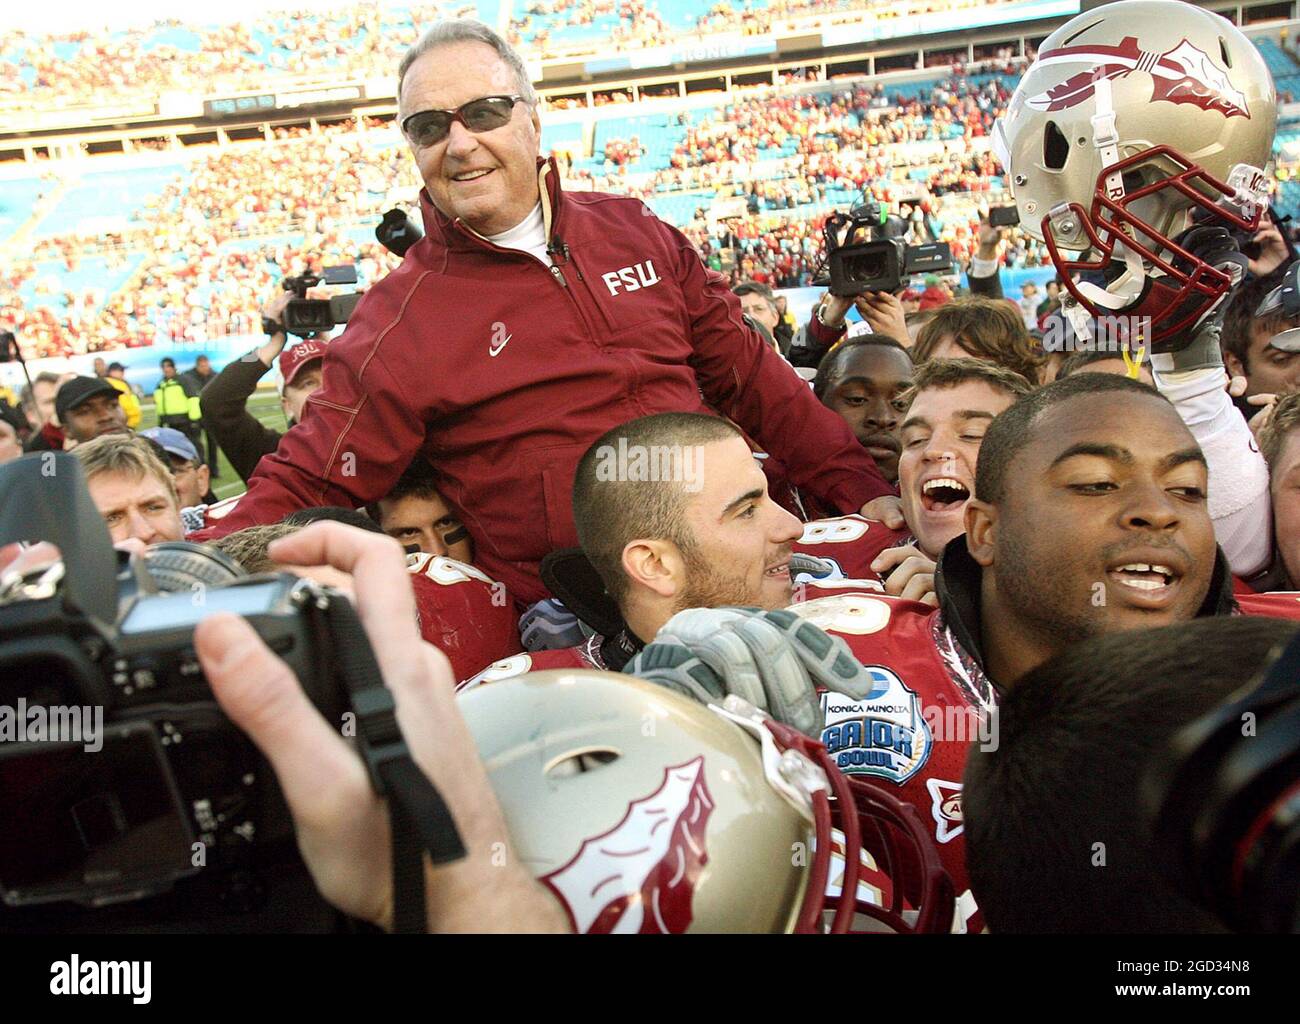 Jacksonville, USA. 01st Jan, 2010. Florida State head coach Bobby Bowden is carried triumphantly on the shoulders of his players after beating West Virginia, 33-21, in the Gator Bowl at Jacksonville Municipal Stadium in Jacksonville, Florida, Friday, January 1, 2010. (Photo by Stephen M. Dowell/Orlando Sentinel/TNS/Sipa USA) Credit: Sipa USA/Alamy Live News Stock Photo